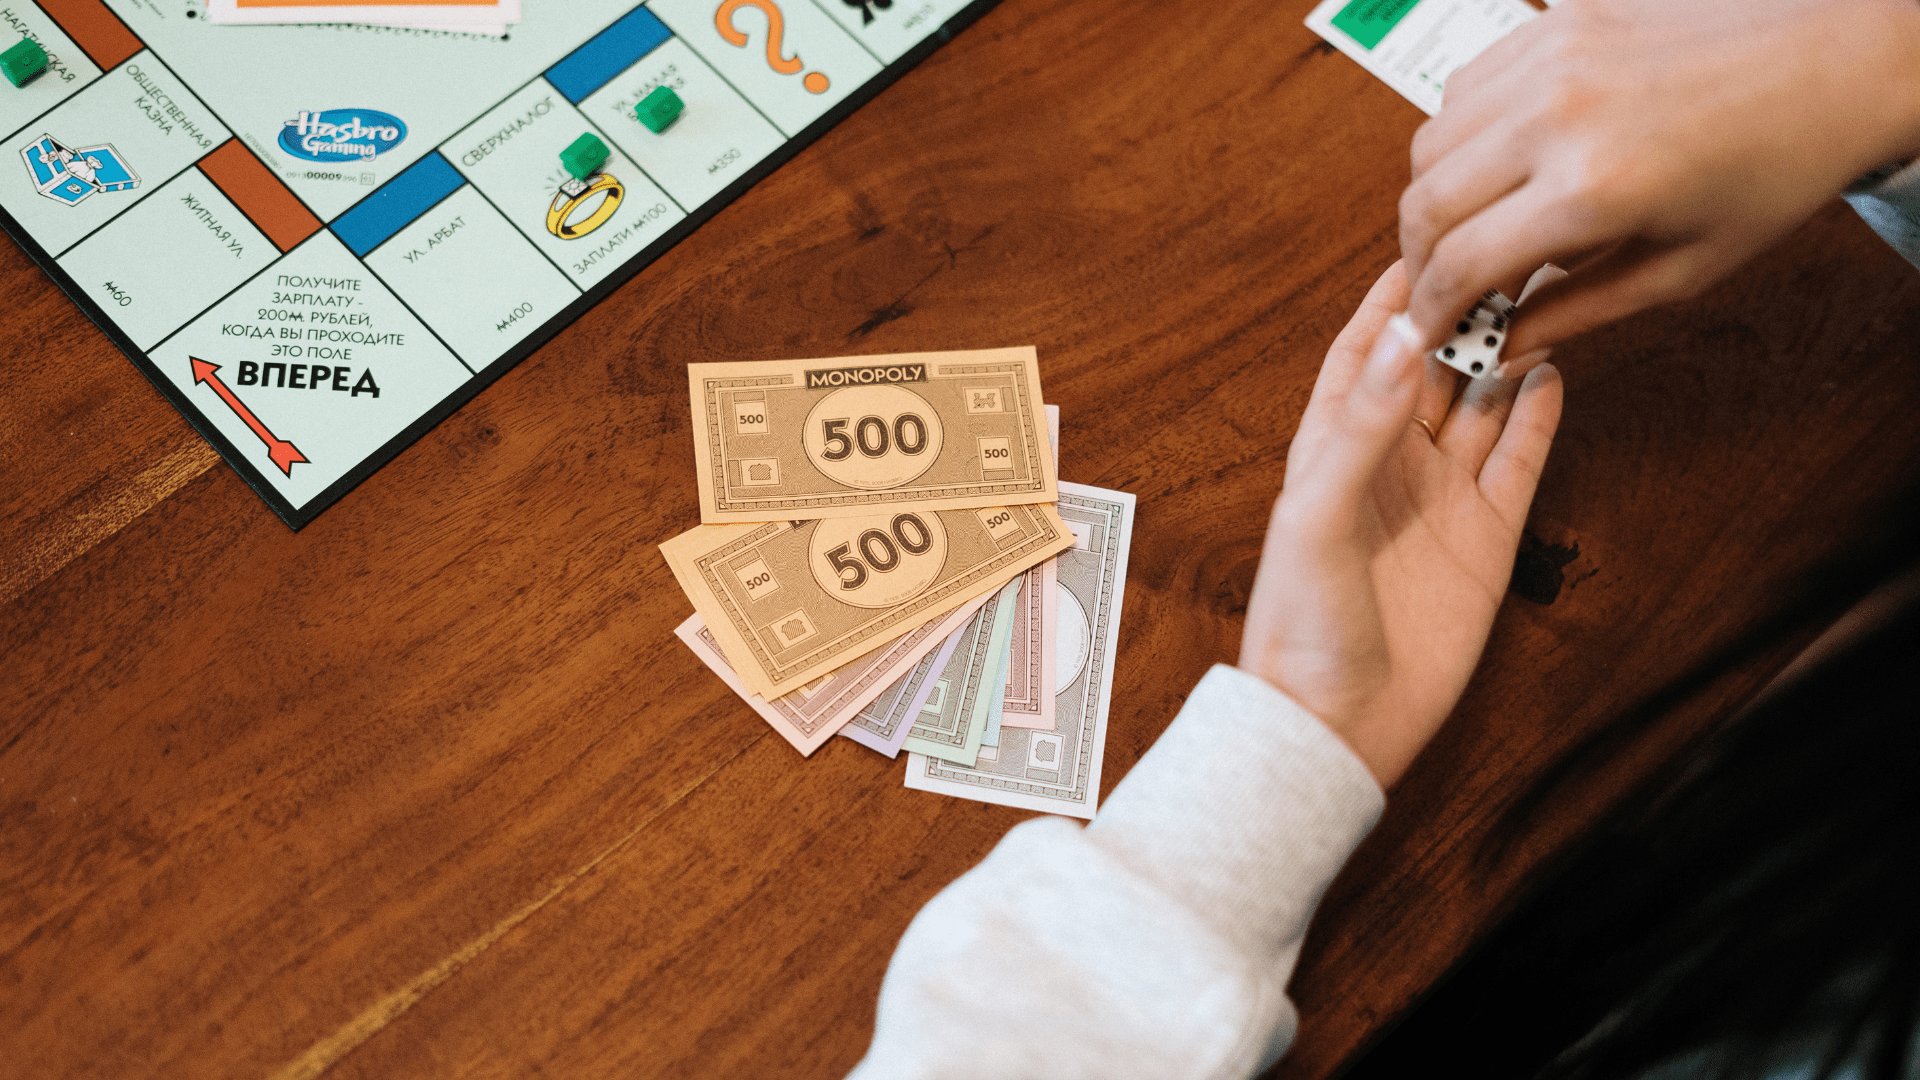 What is Monopoly? - Learning Perspectives